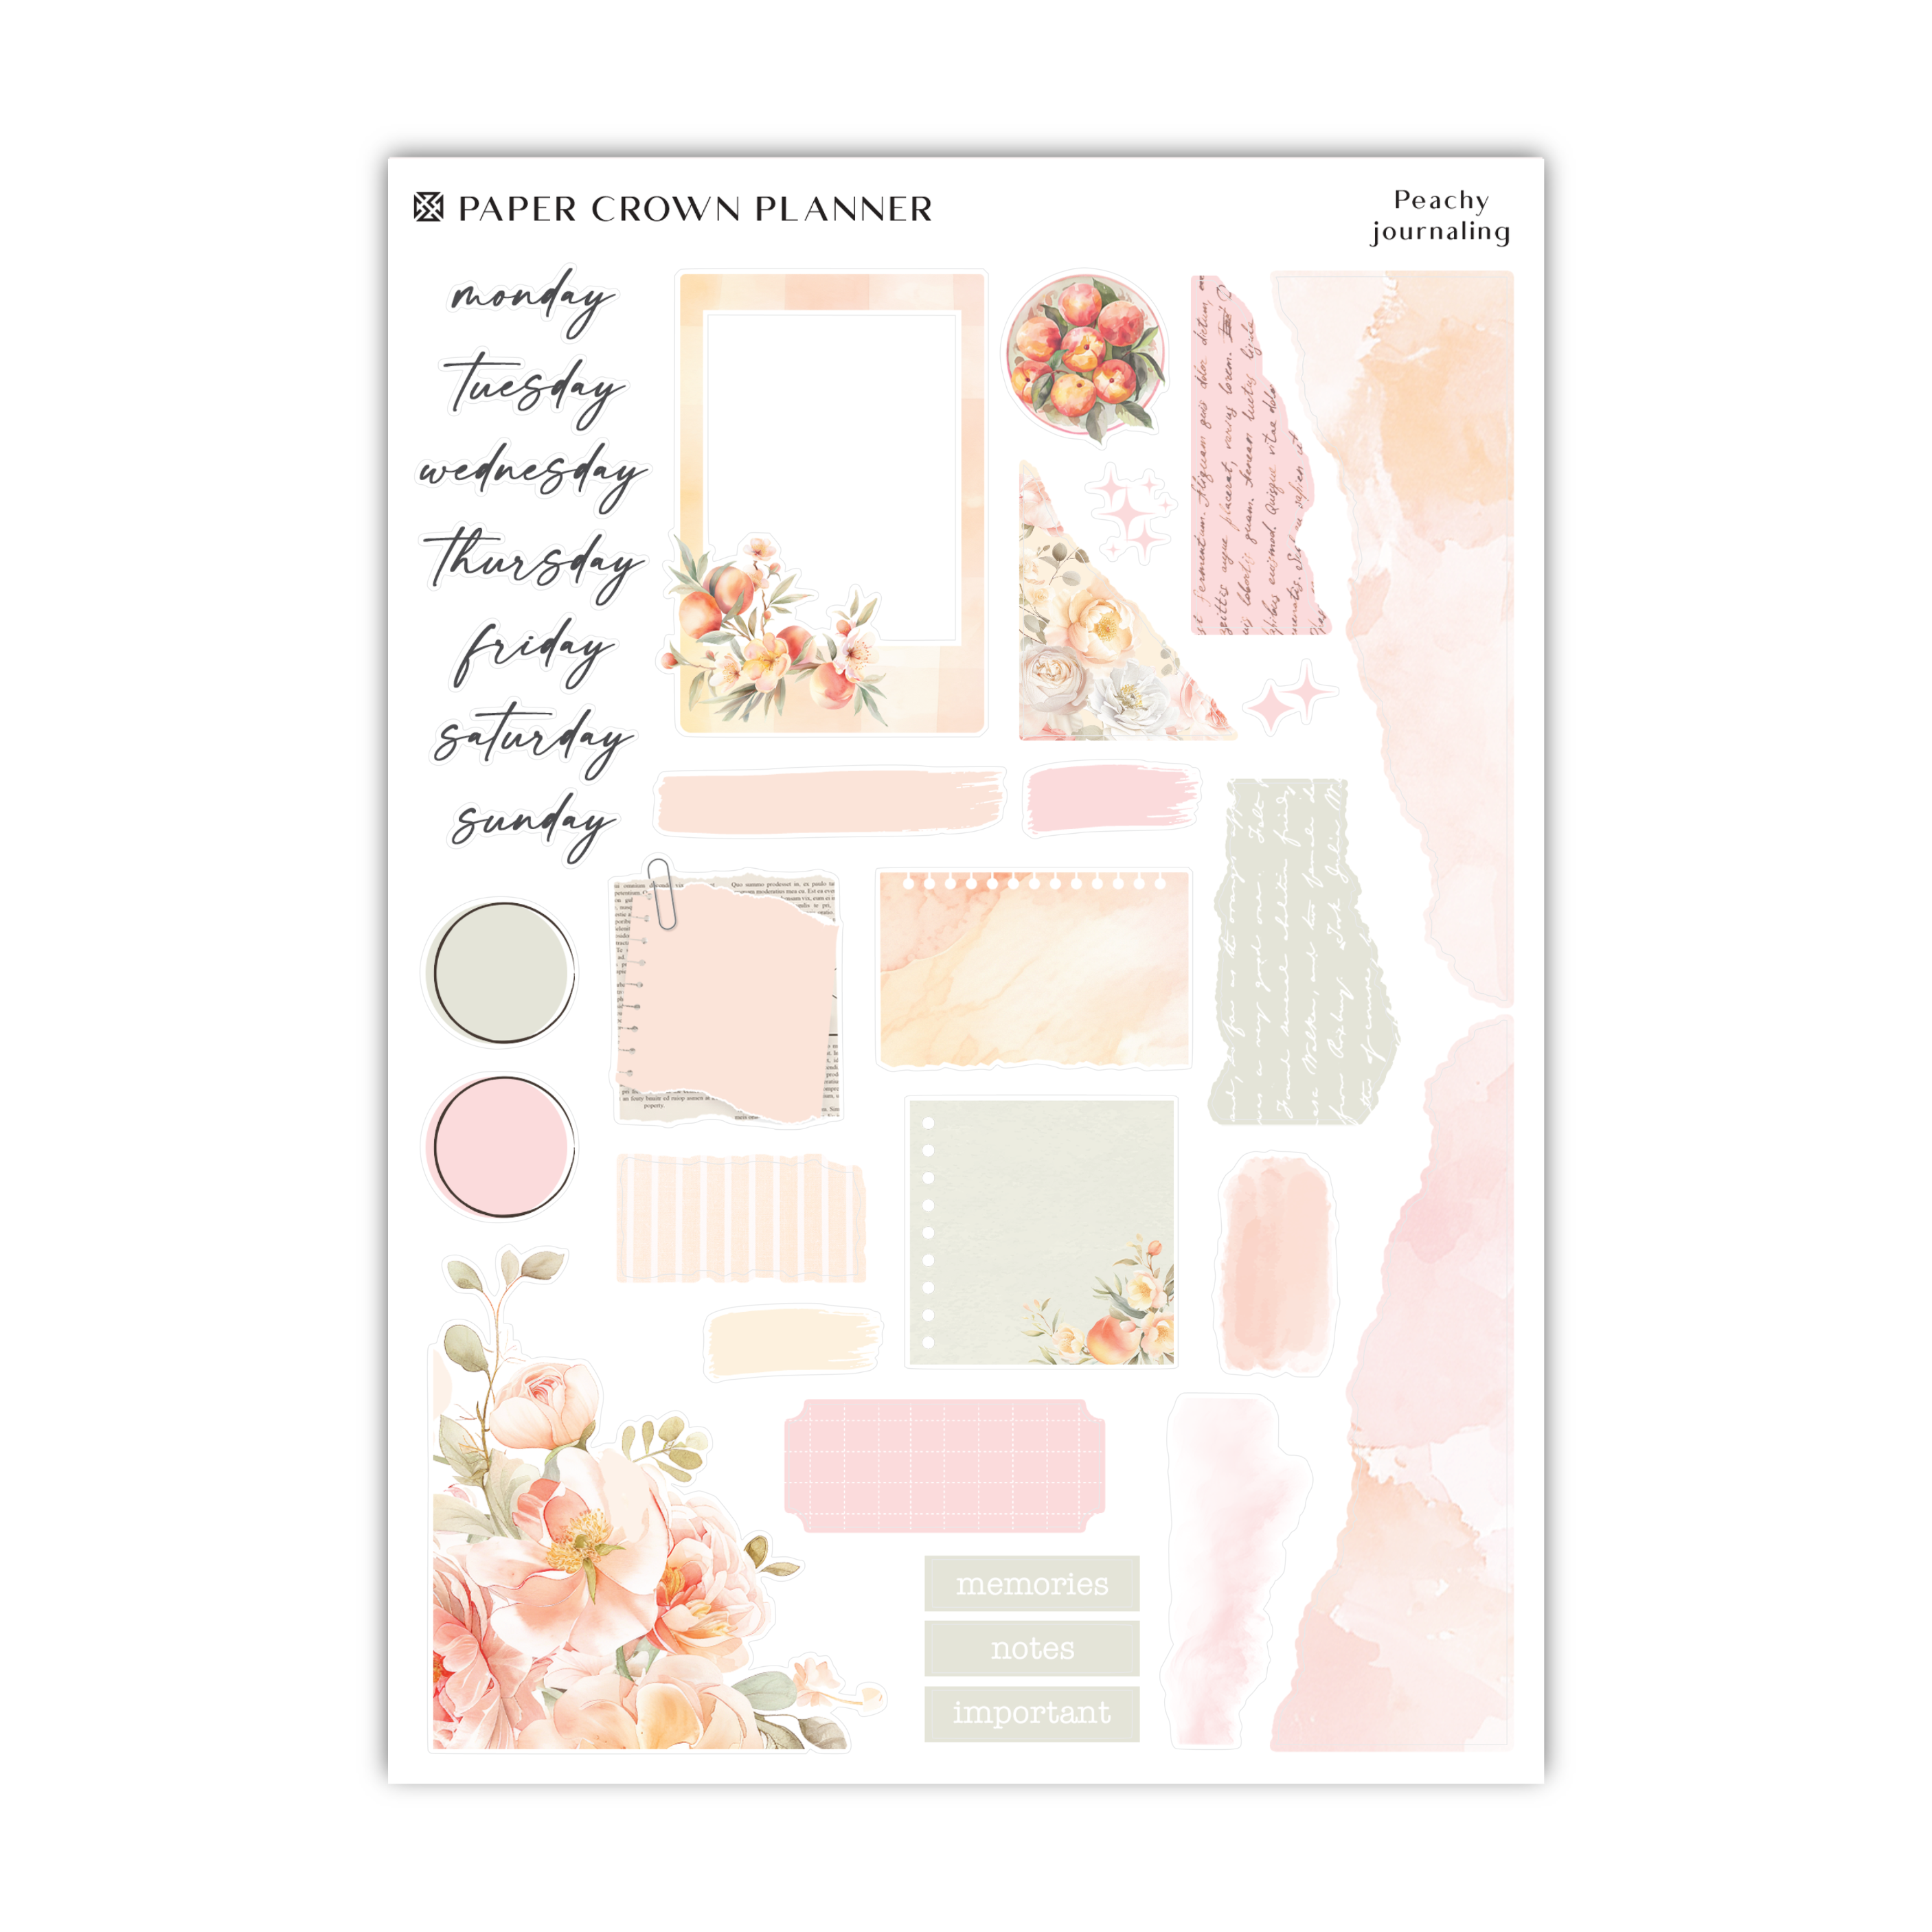 a paper crown planner with flowers and pastel colors